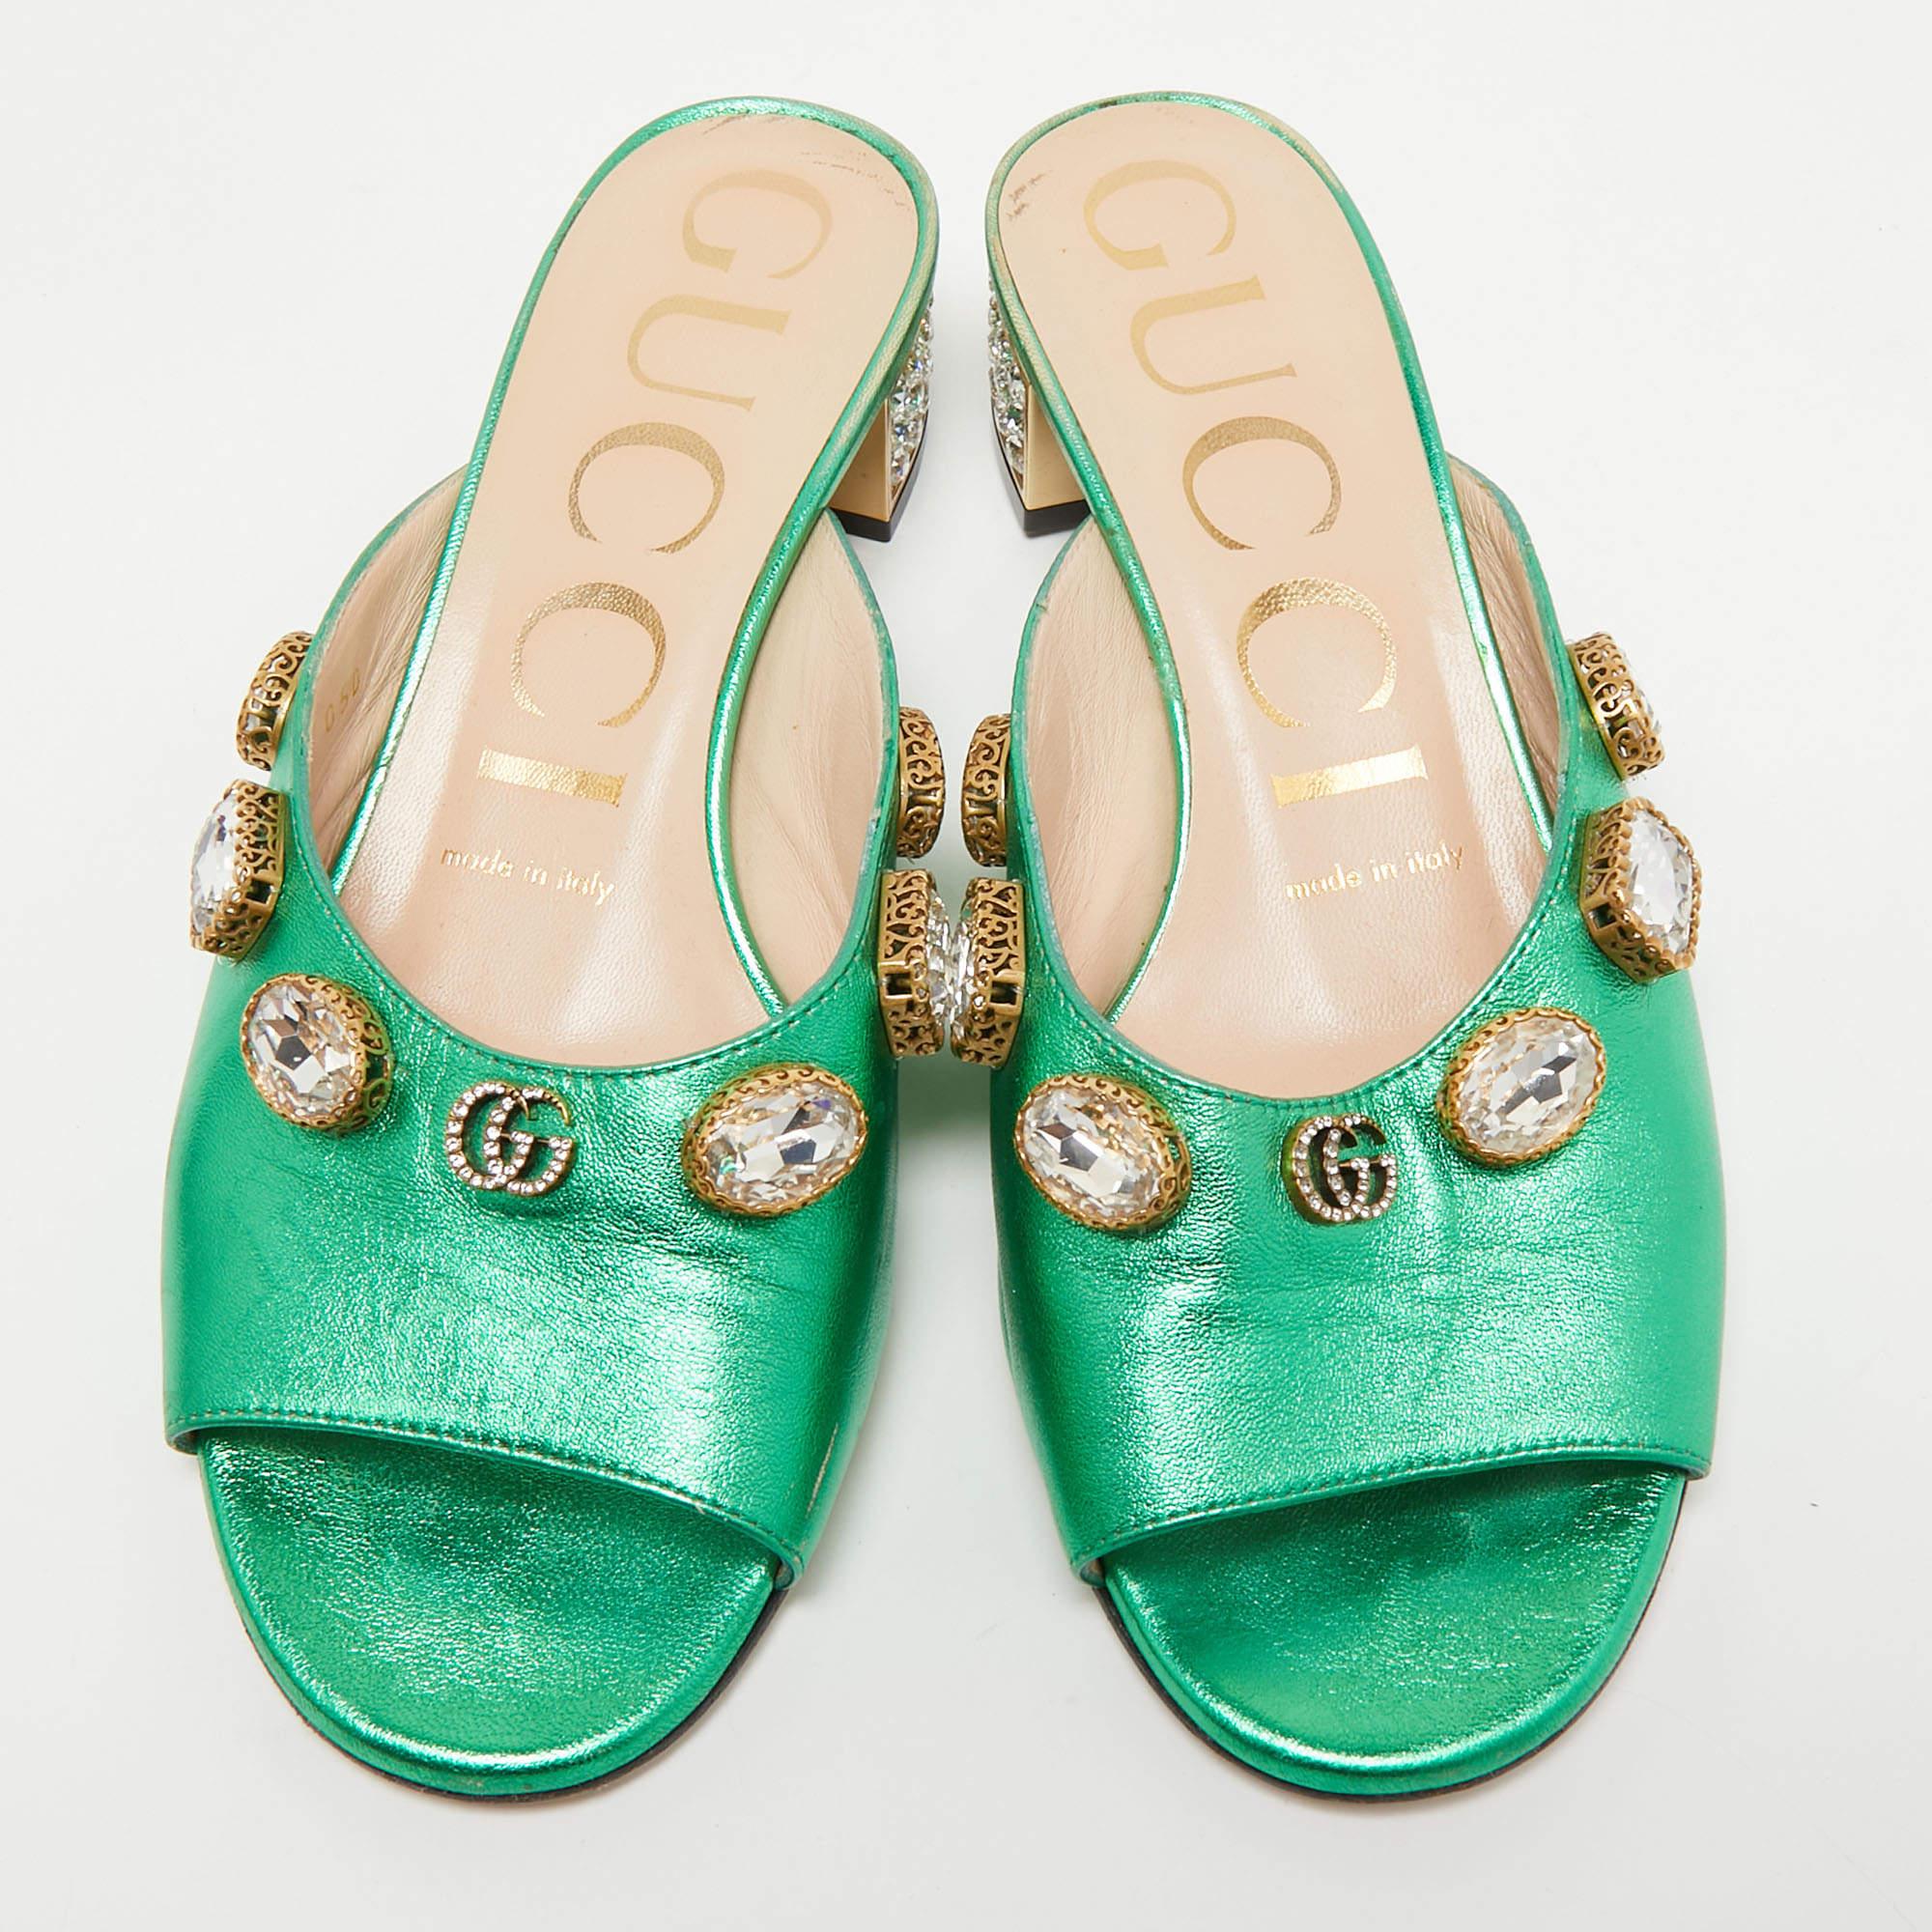 These slides by Gucci showcase a lovely design. Crafted from leather, the slides feature open toes and crystal-embellished uppers. They come with leather-lined insoles and block heels. Wear them with any outfit for an elegant take.

